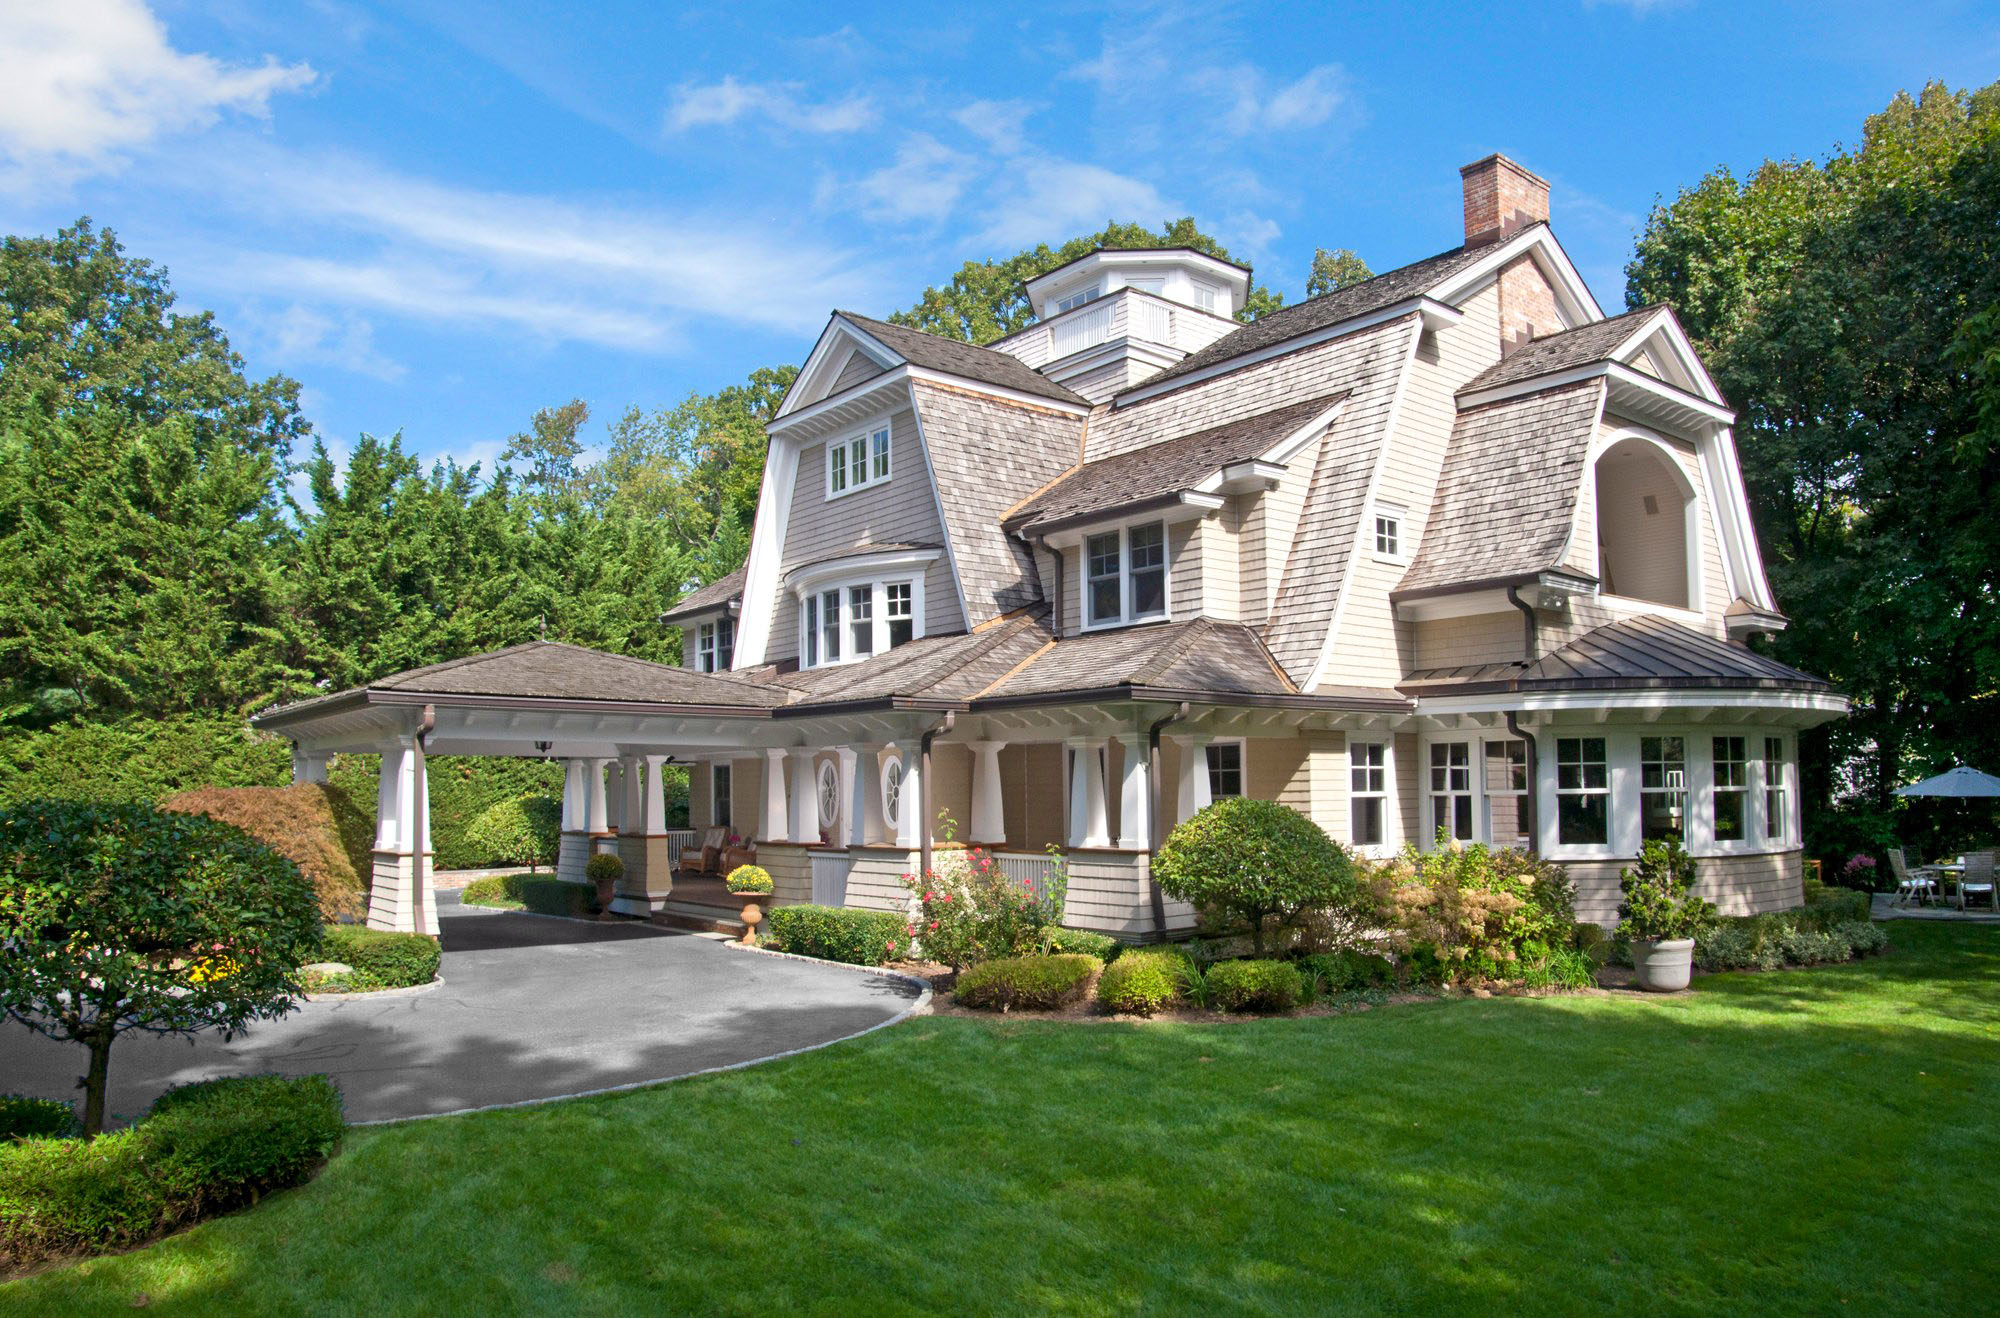 Beautiful shingle style home with a concrete driveway colored dark grey.